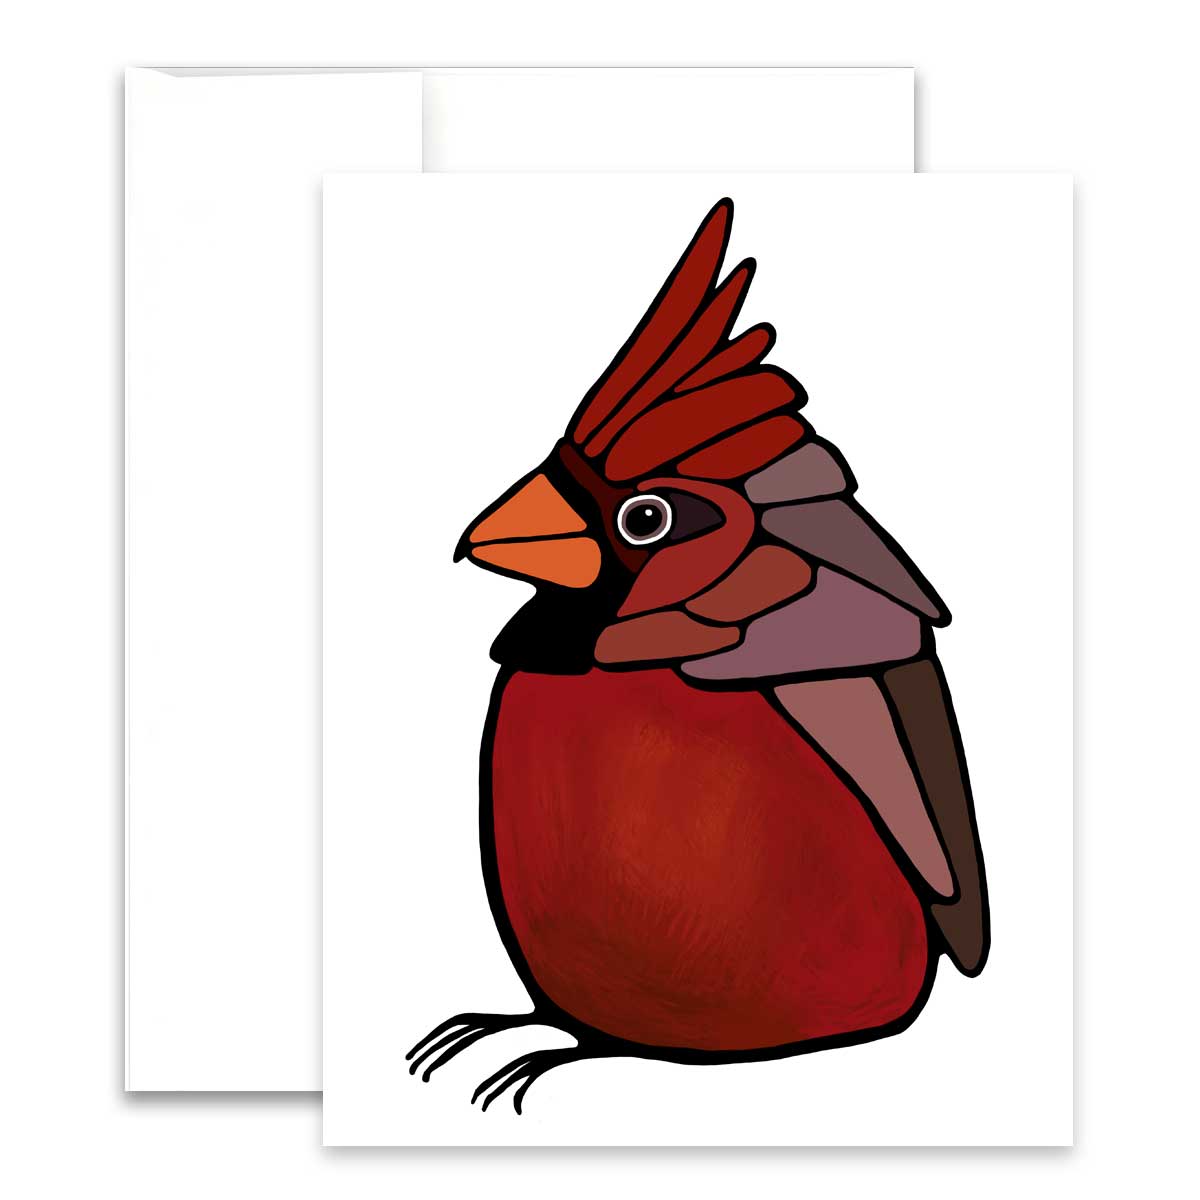 Pack of 5 Greeting Cards - Canadian Birds